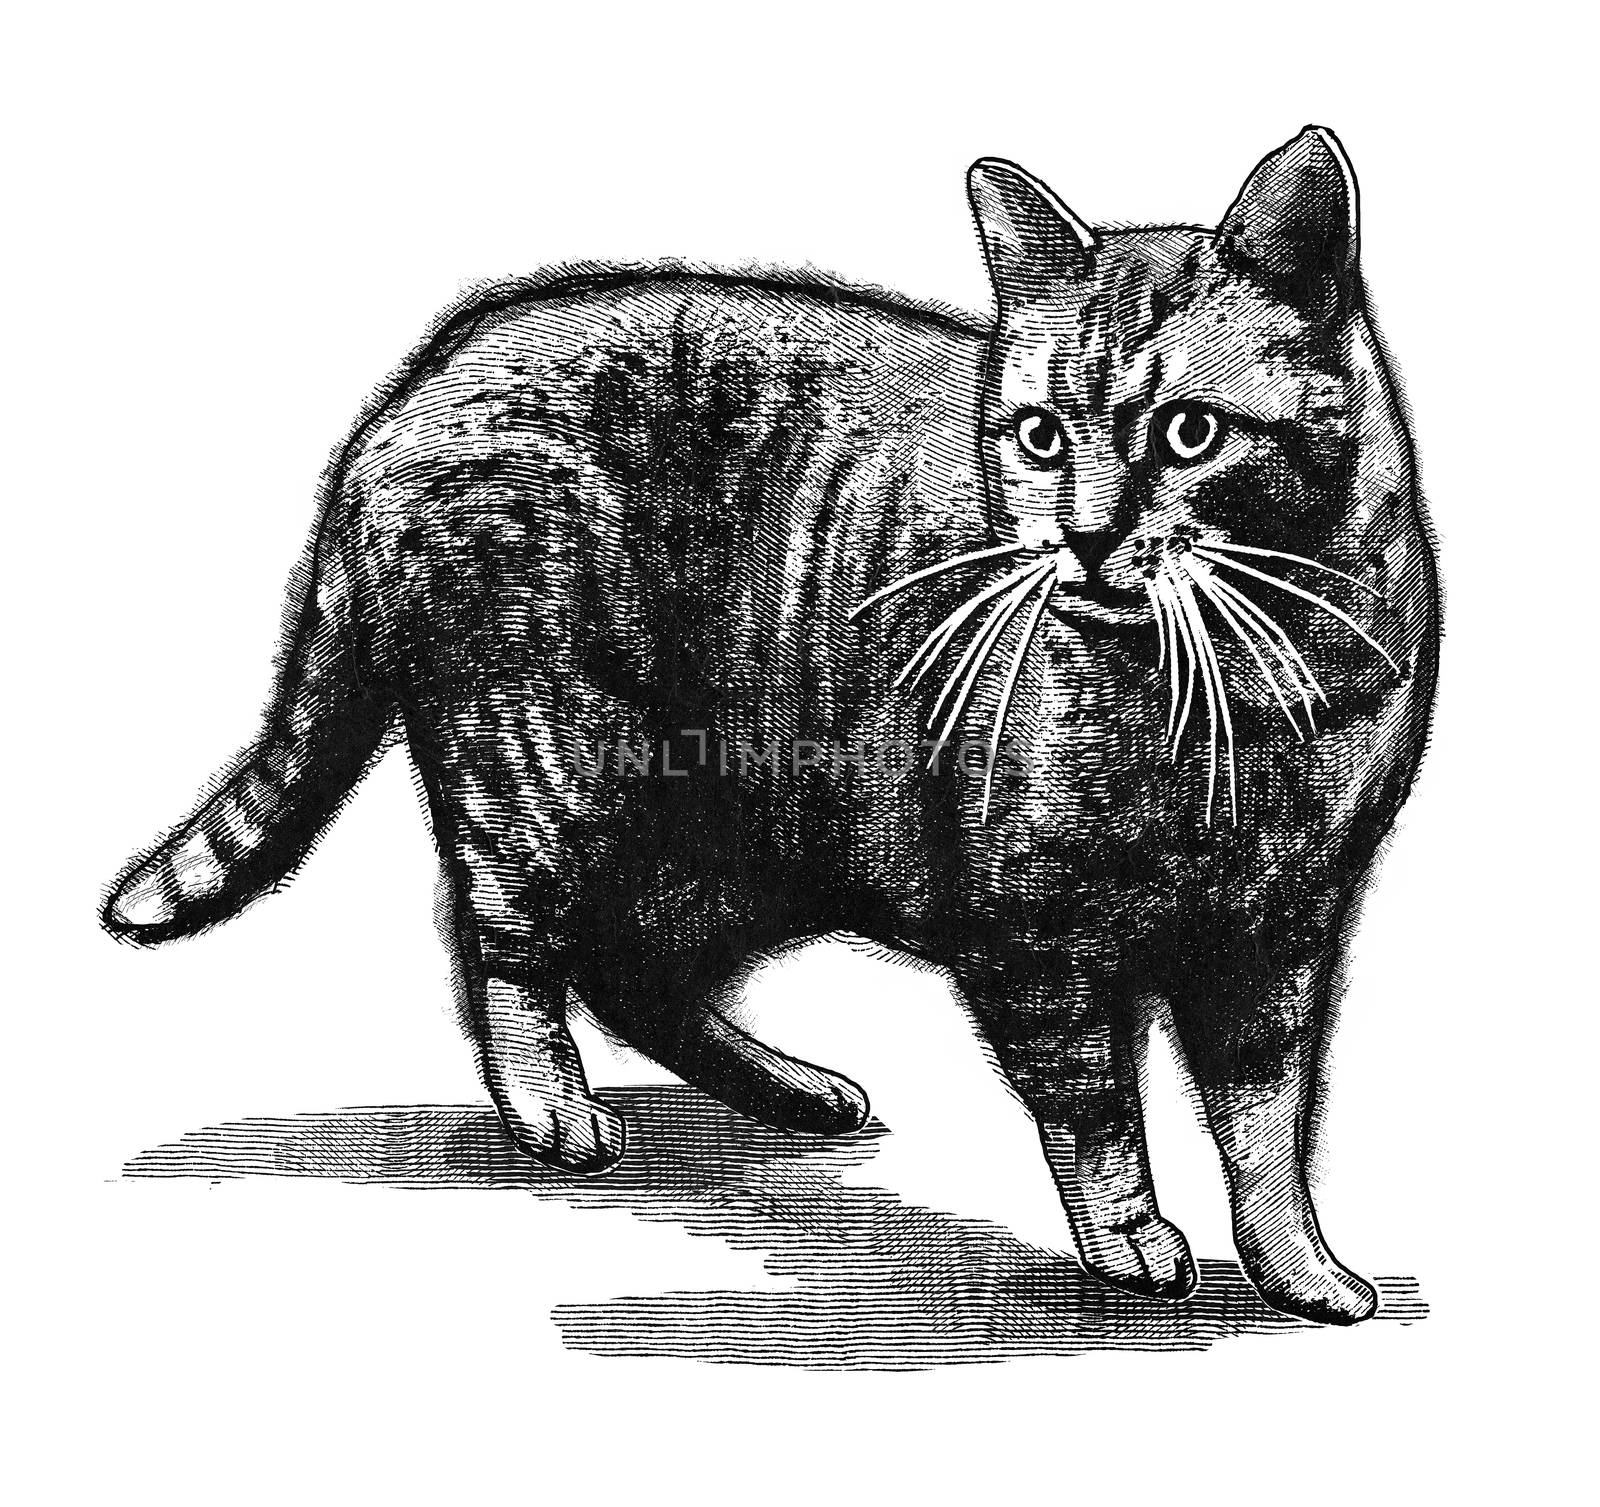 Original digital illustration of a cat, in style of old engravings.